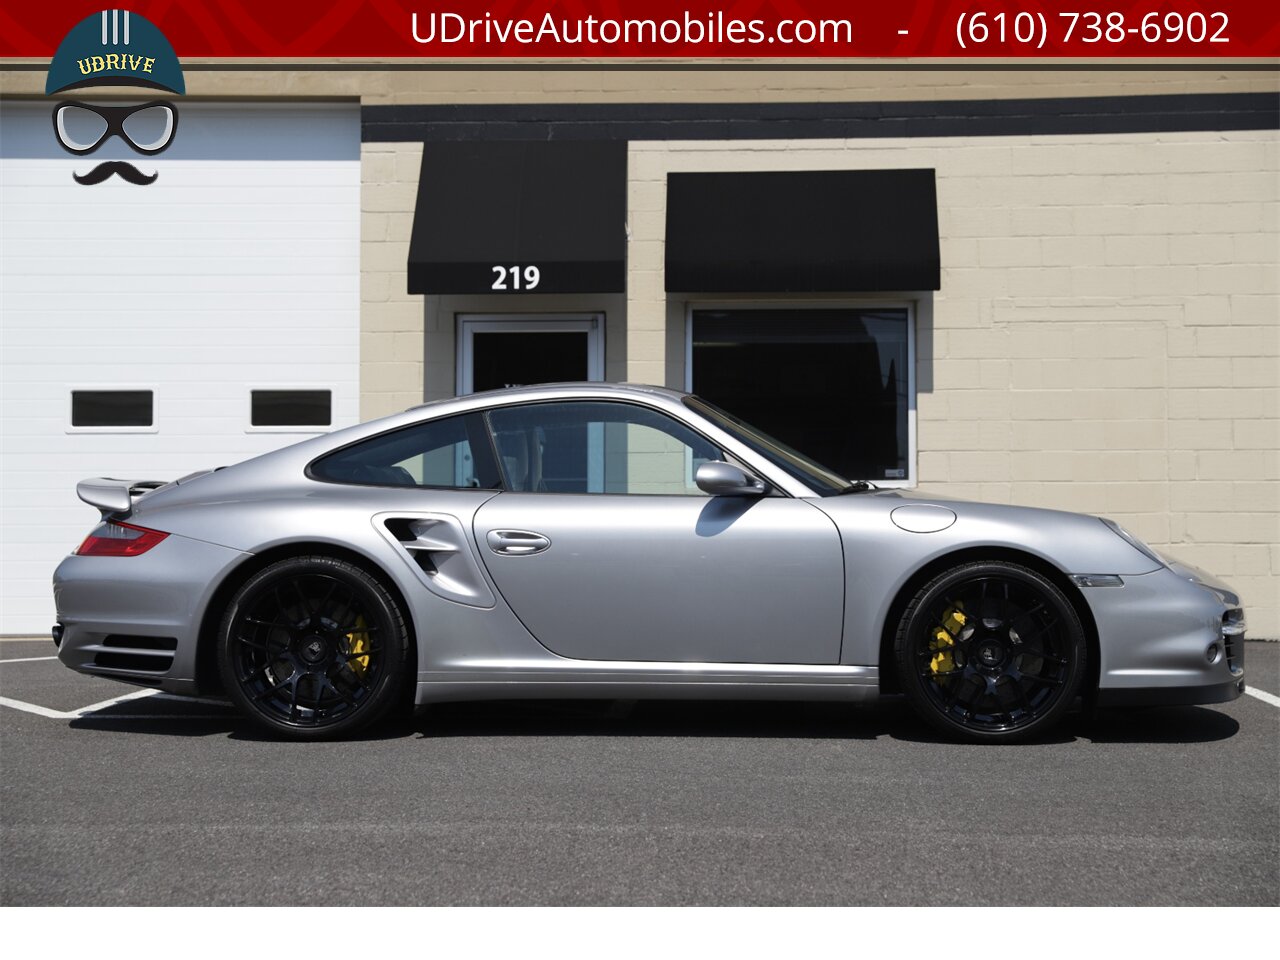 2008 Porsche 911 6 Speed Manual Turbo 997 PCCB's $149k MSRP   - Photo 16 - West Chester, PA 19382